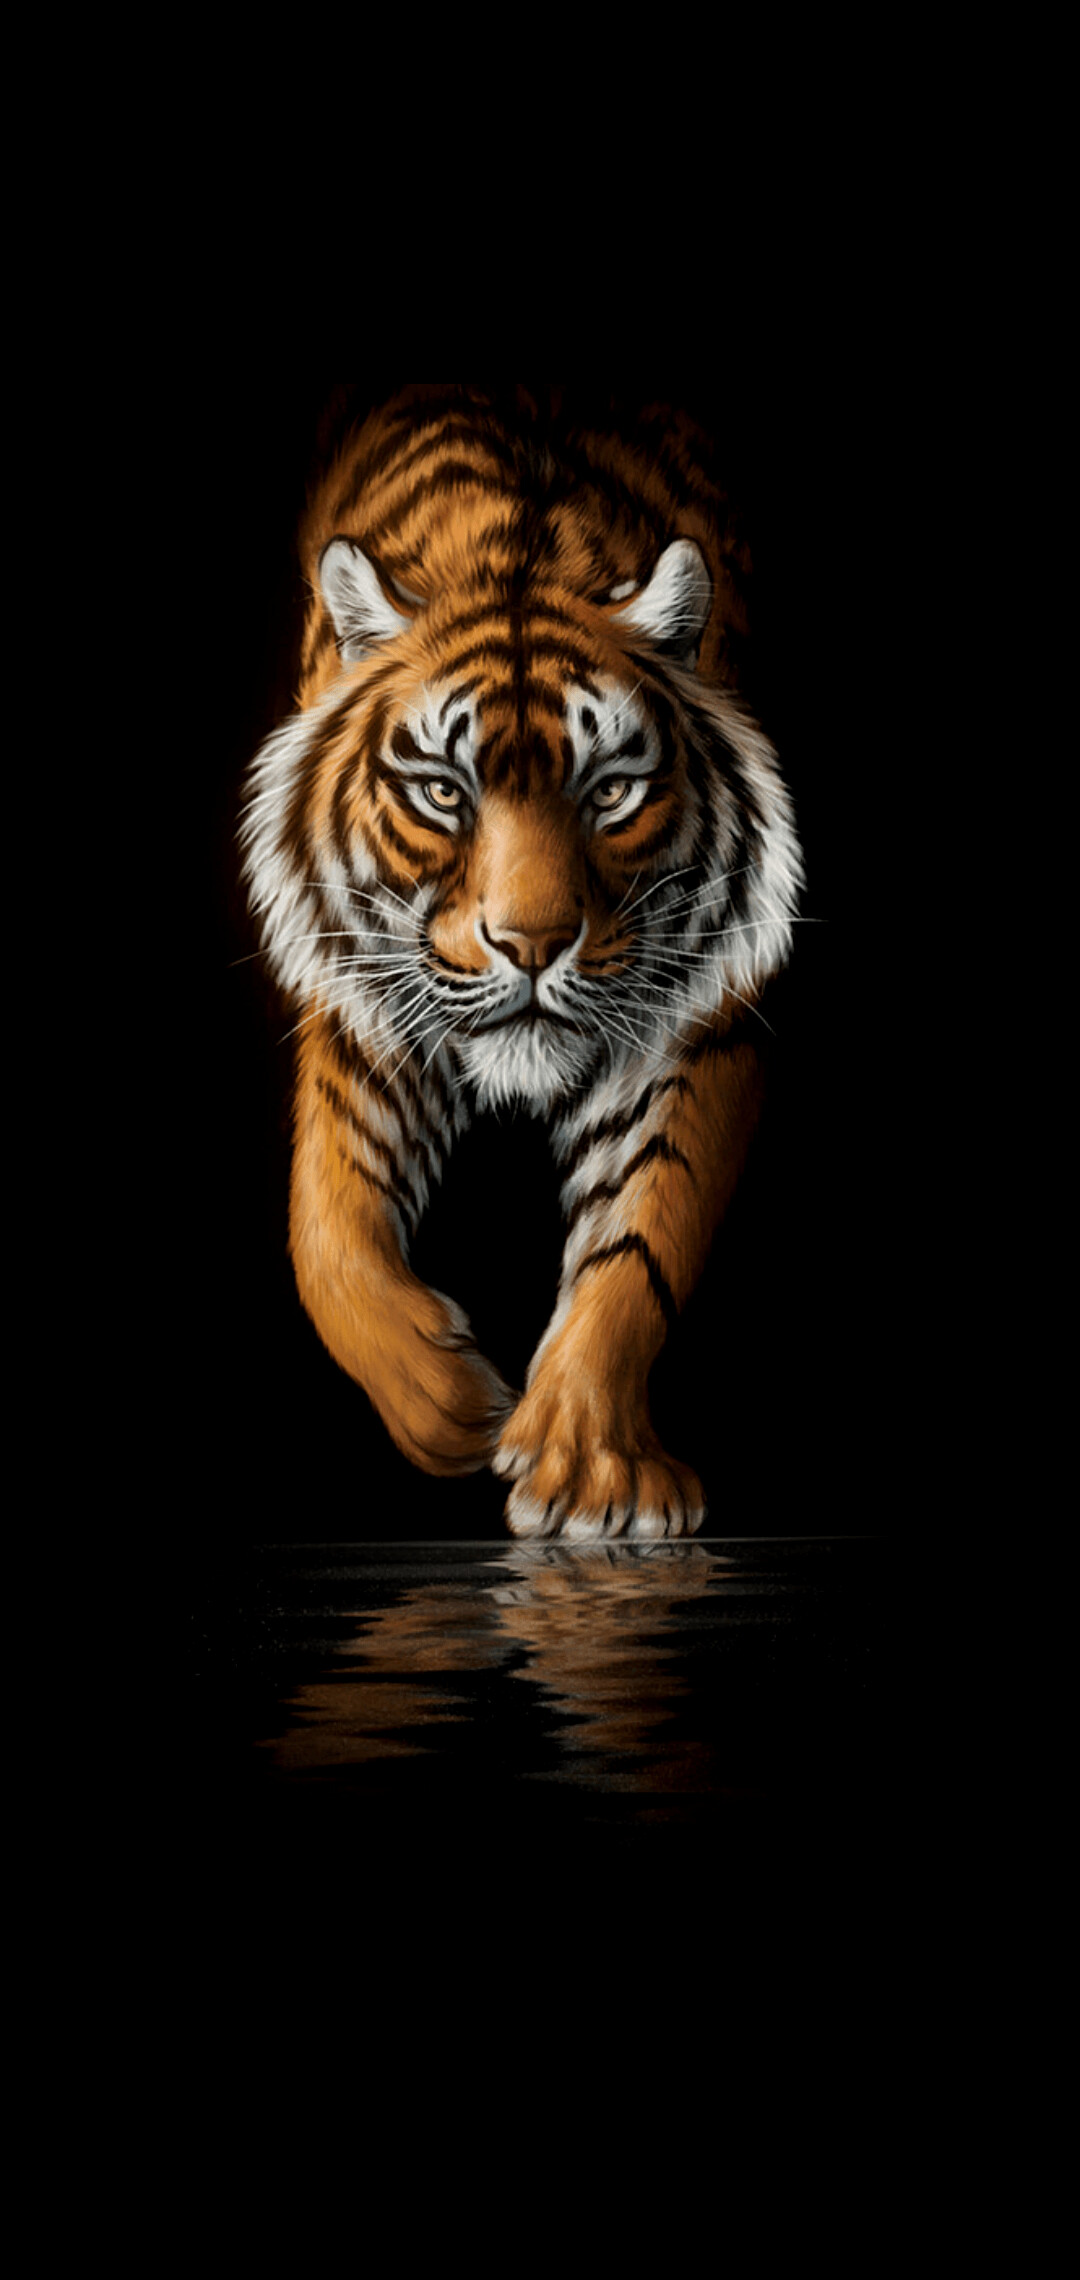 Tiger: Solitary ambush predator that relies on stealth and strength to take down prey. 1080x2280 HD Wallpaper.